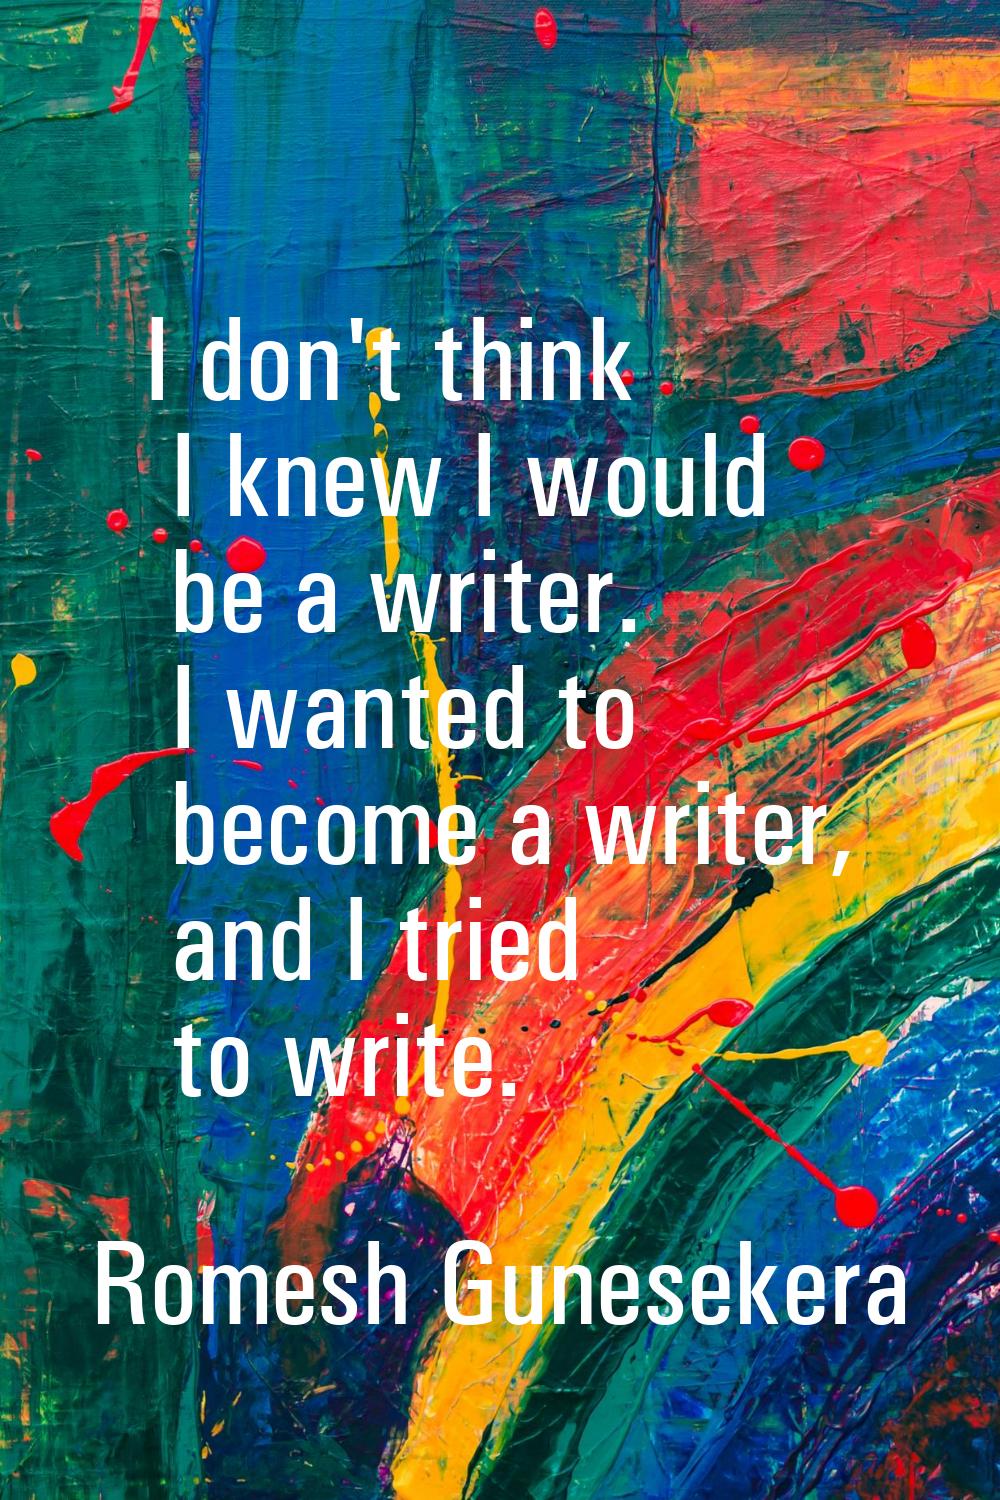 I don't think I knew I would be a writer. I wanted to become a writer, and I tried to write.